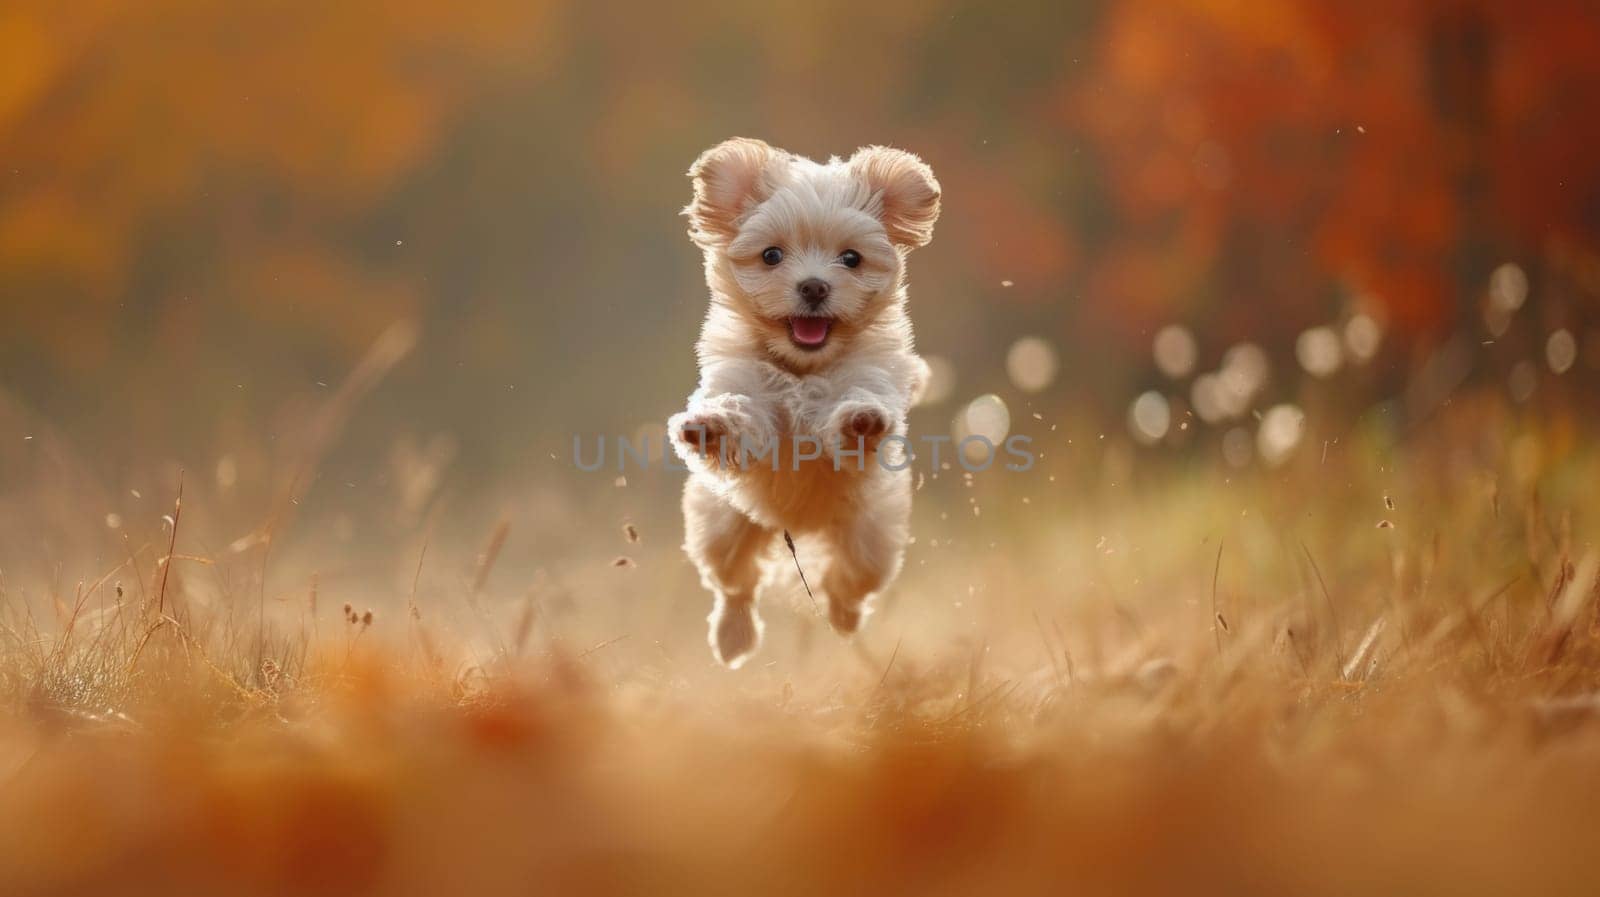 A small white dog jumping in the air on a field